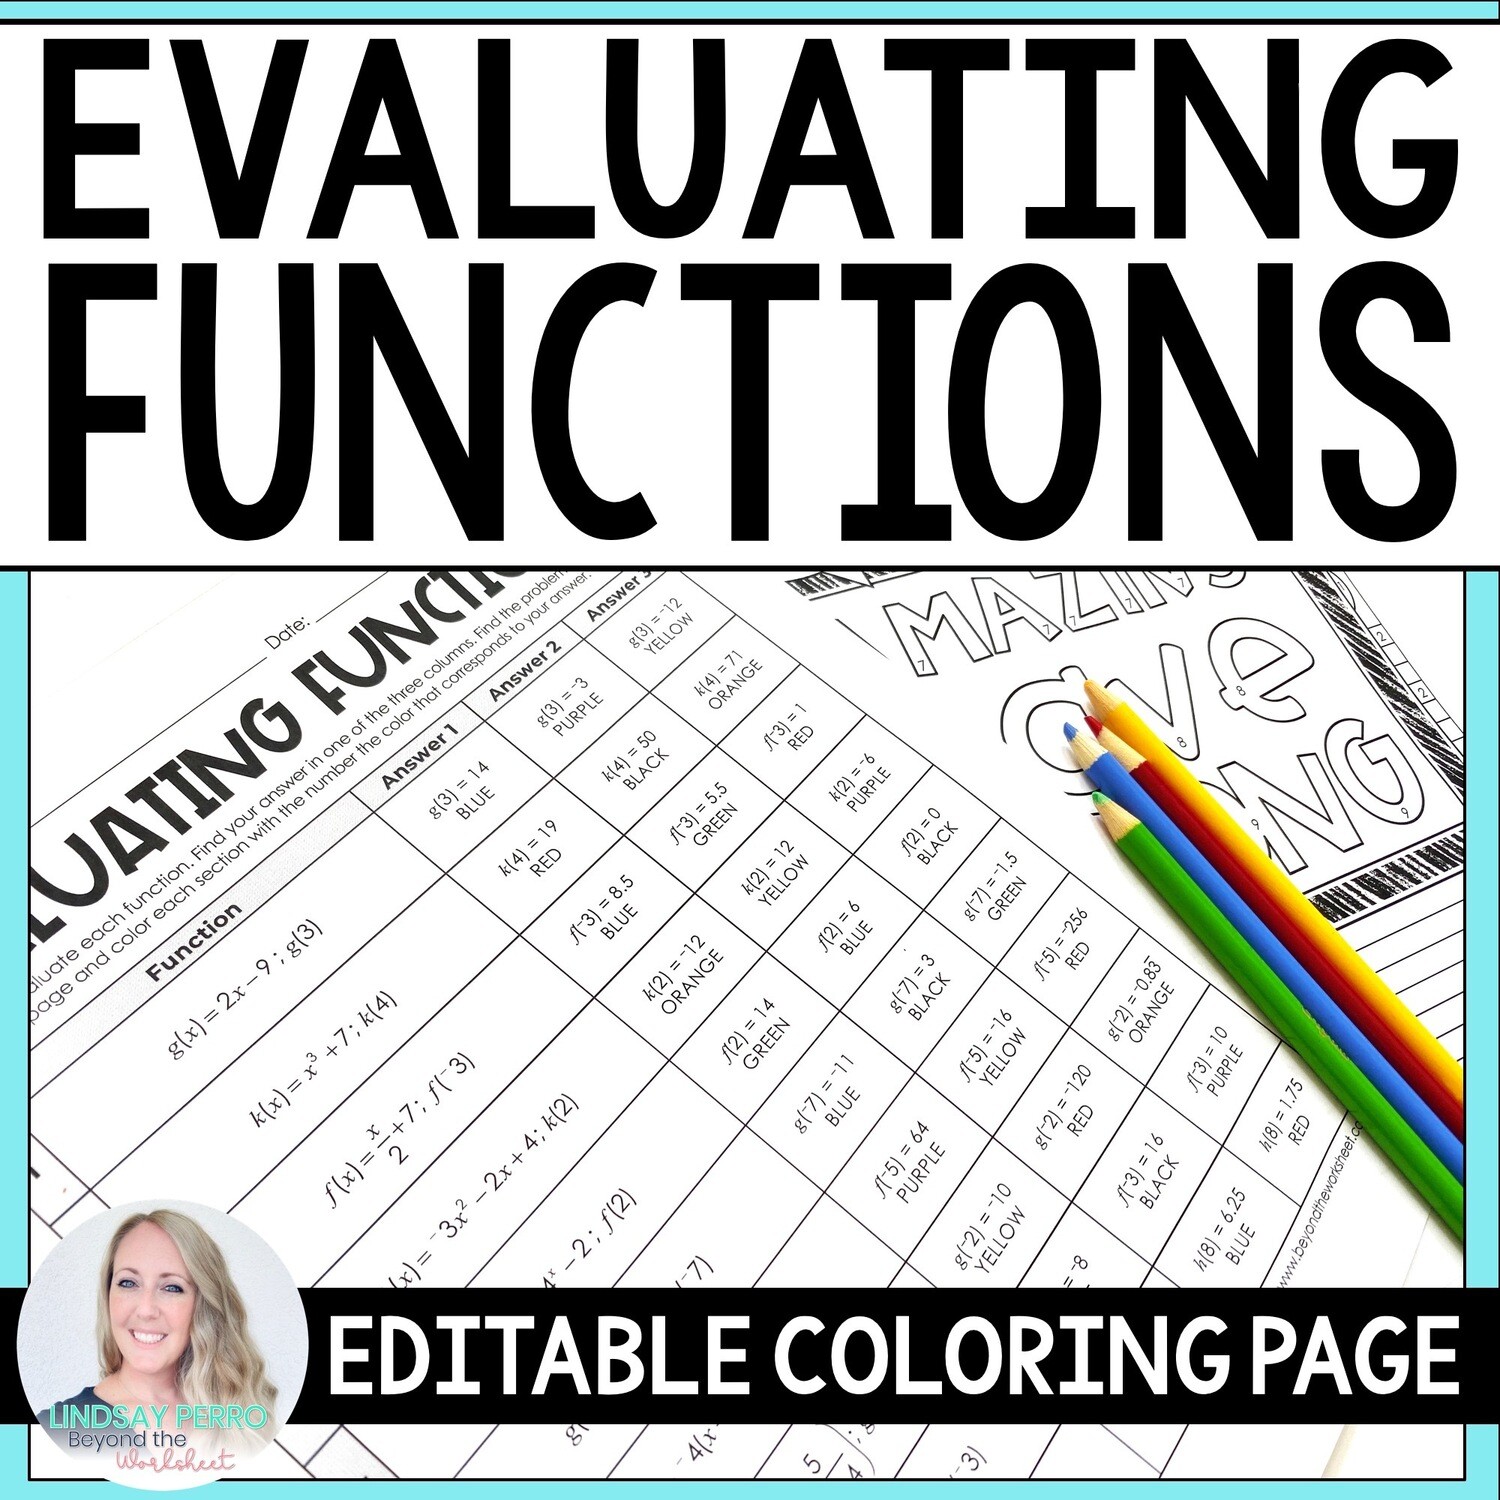 Evaluating Functions Editable Coloring Page Inside Evaluating Functions Worksheet Pdf